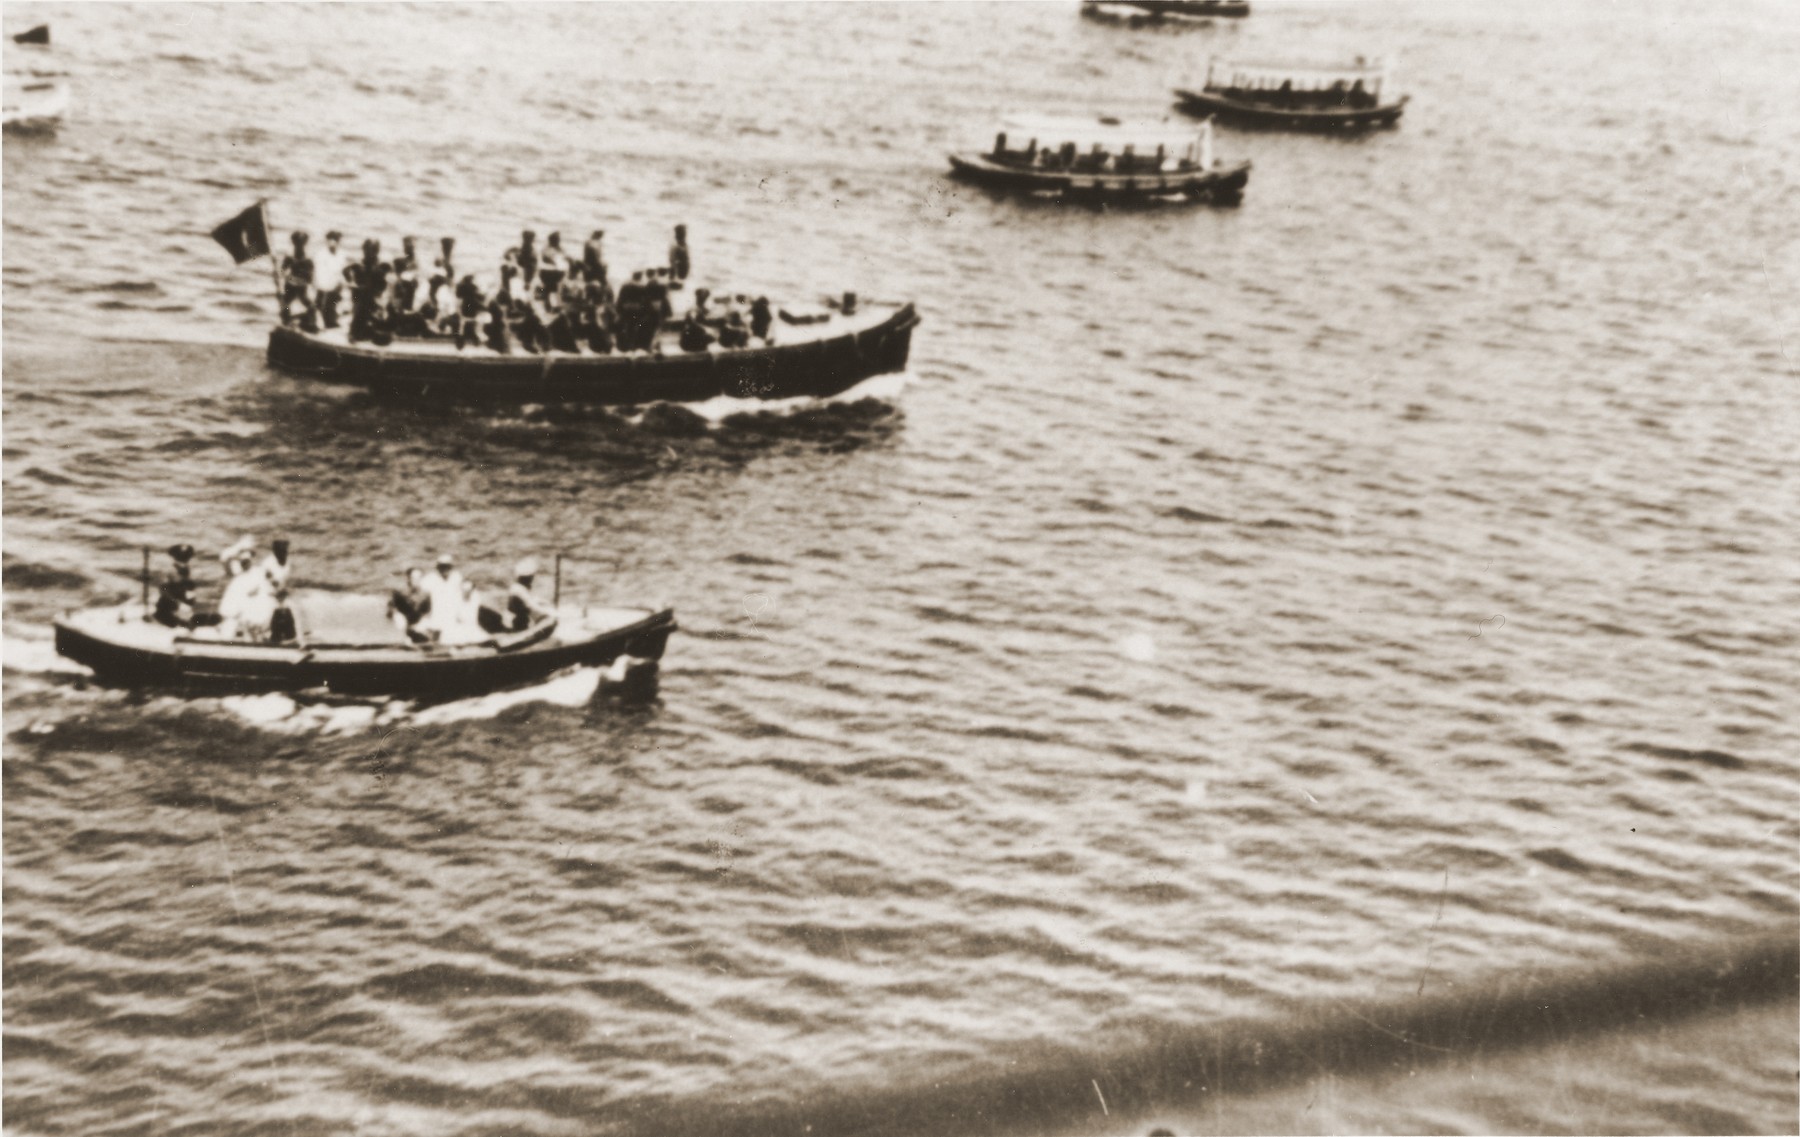 View of Havana harbor with several small boats carrying relatives of St. Louis passengers, Cuban officials and other negotiators seeking to resolve the St. Louis crisis.